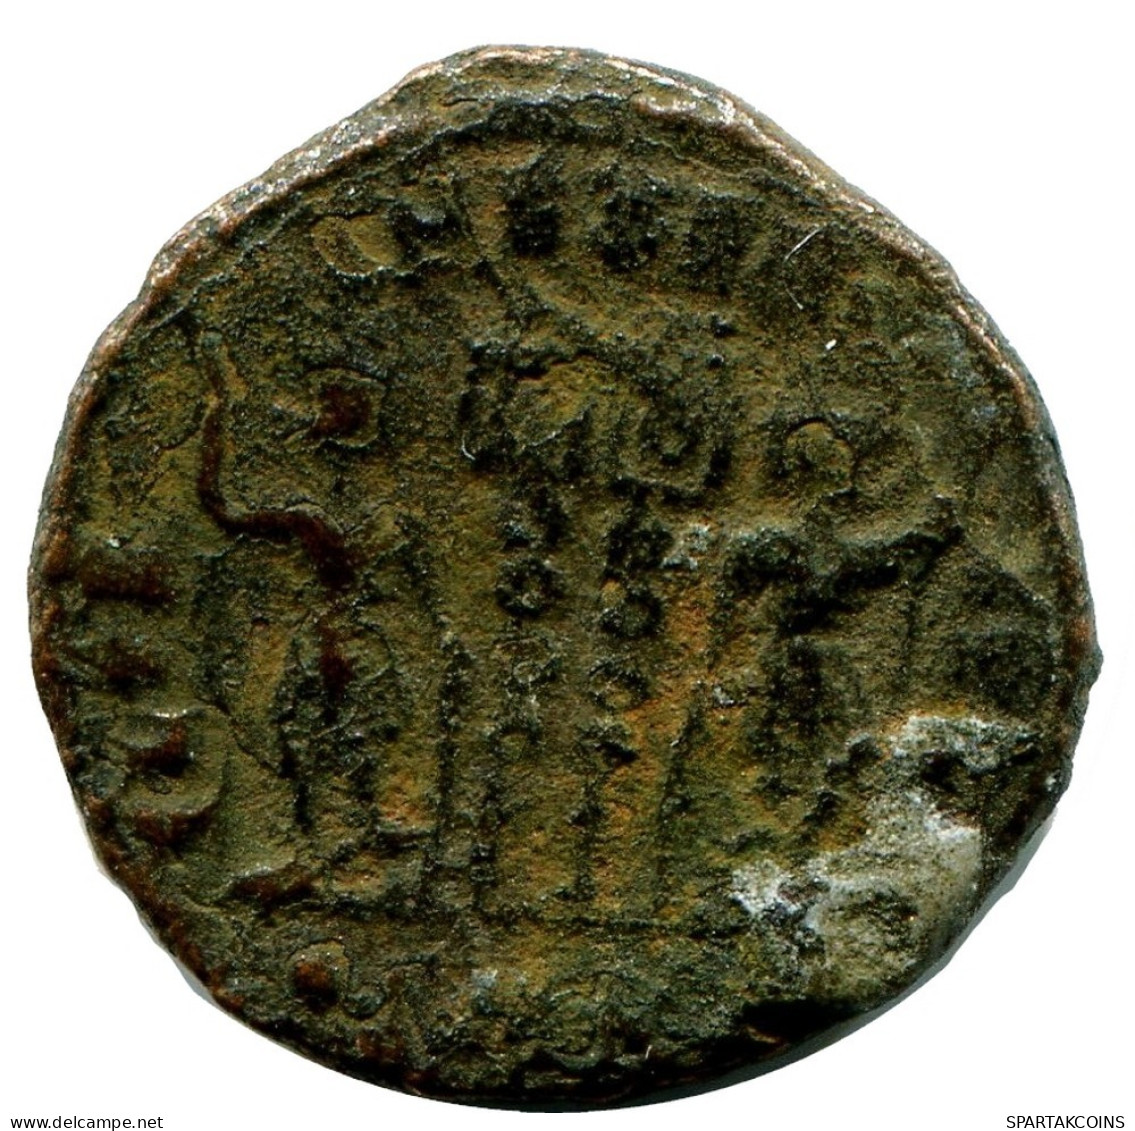 CONSTANTINE I MINTED IN CYZICUS FROM THE ROYAL ONTARIO MUSEUM #ANC11025.14.E.A - The Christian Empire (307 AD To 363 AD)